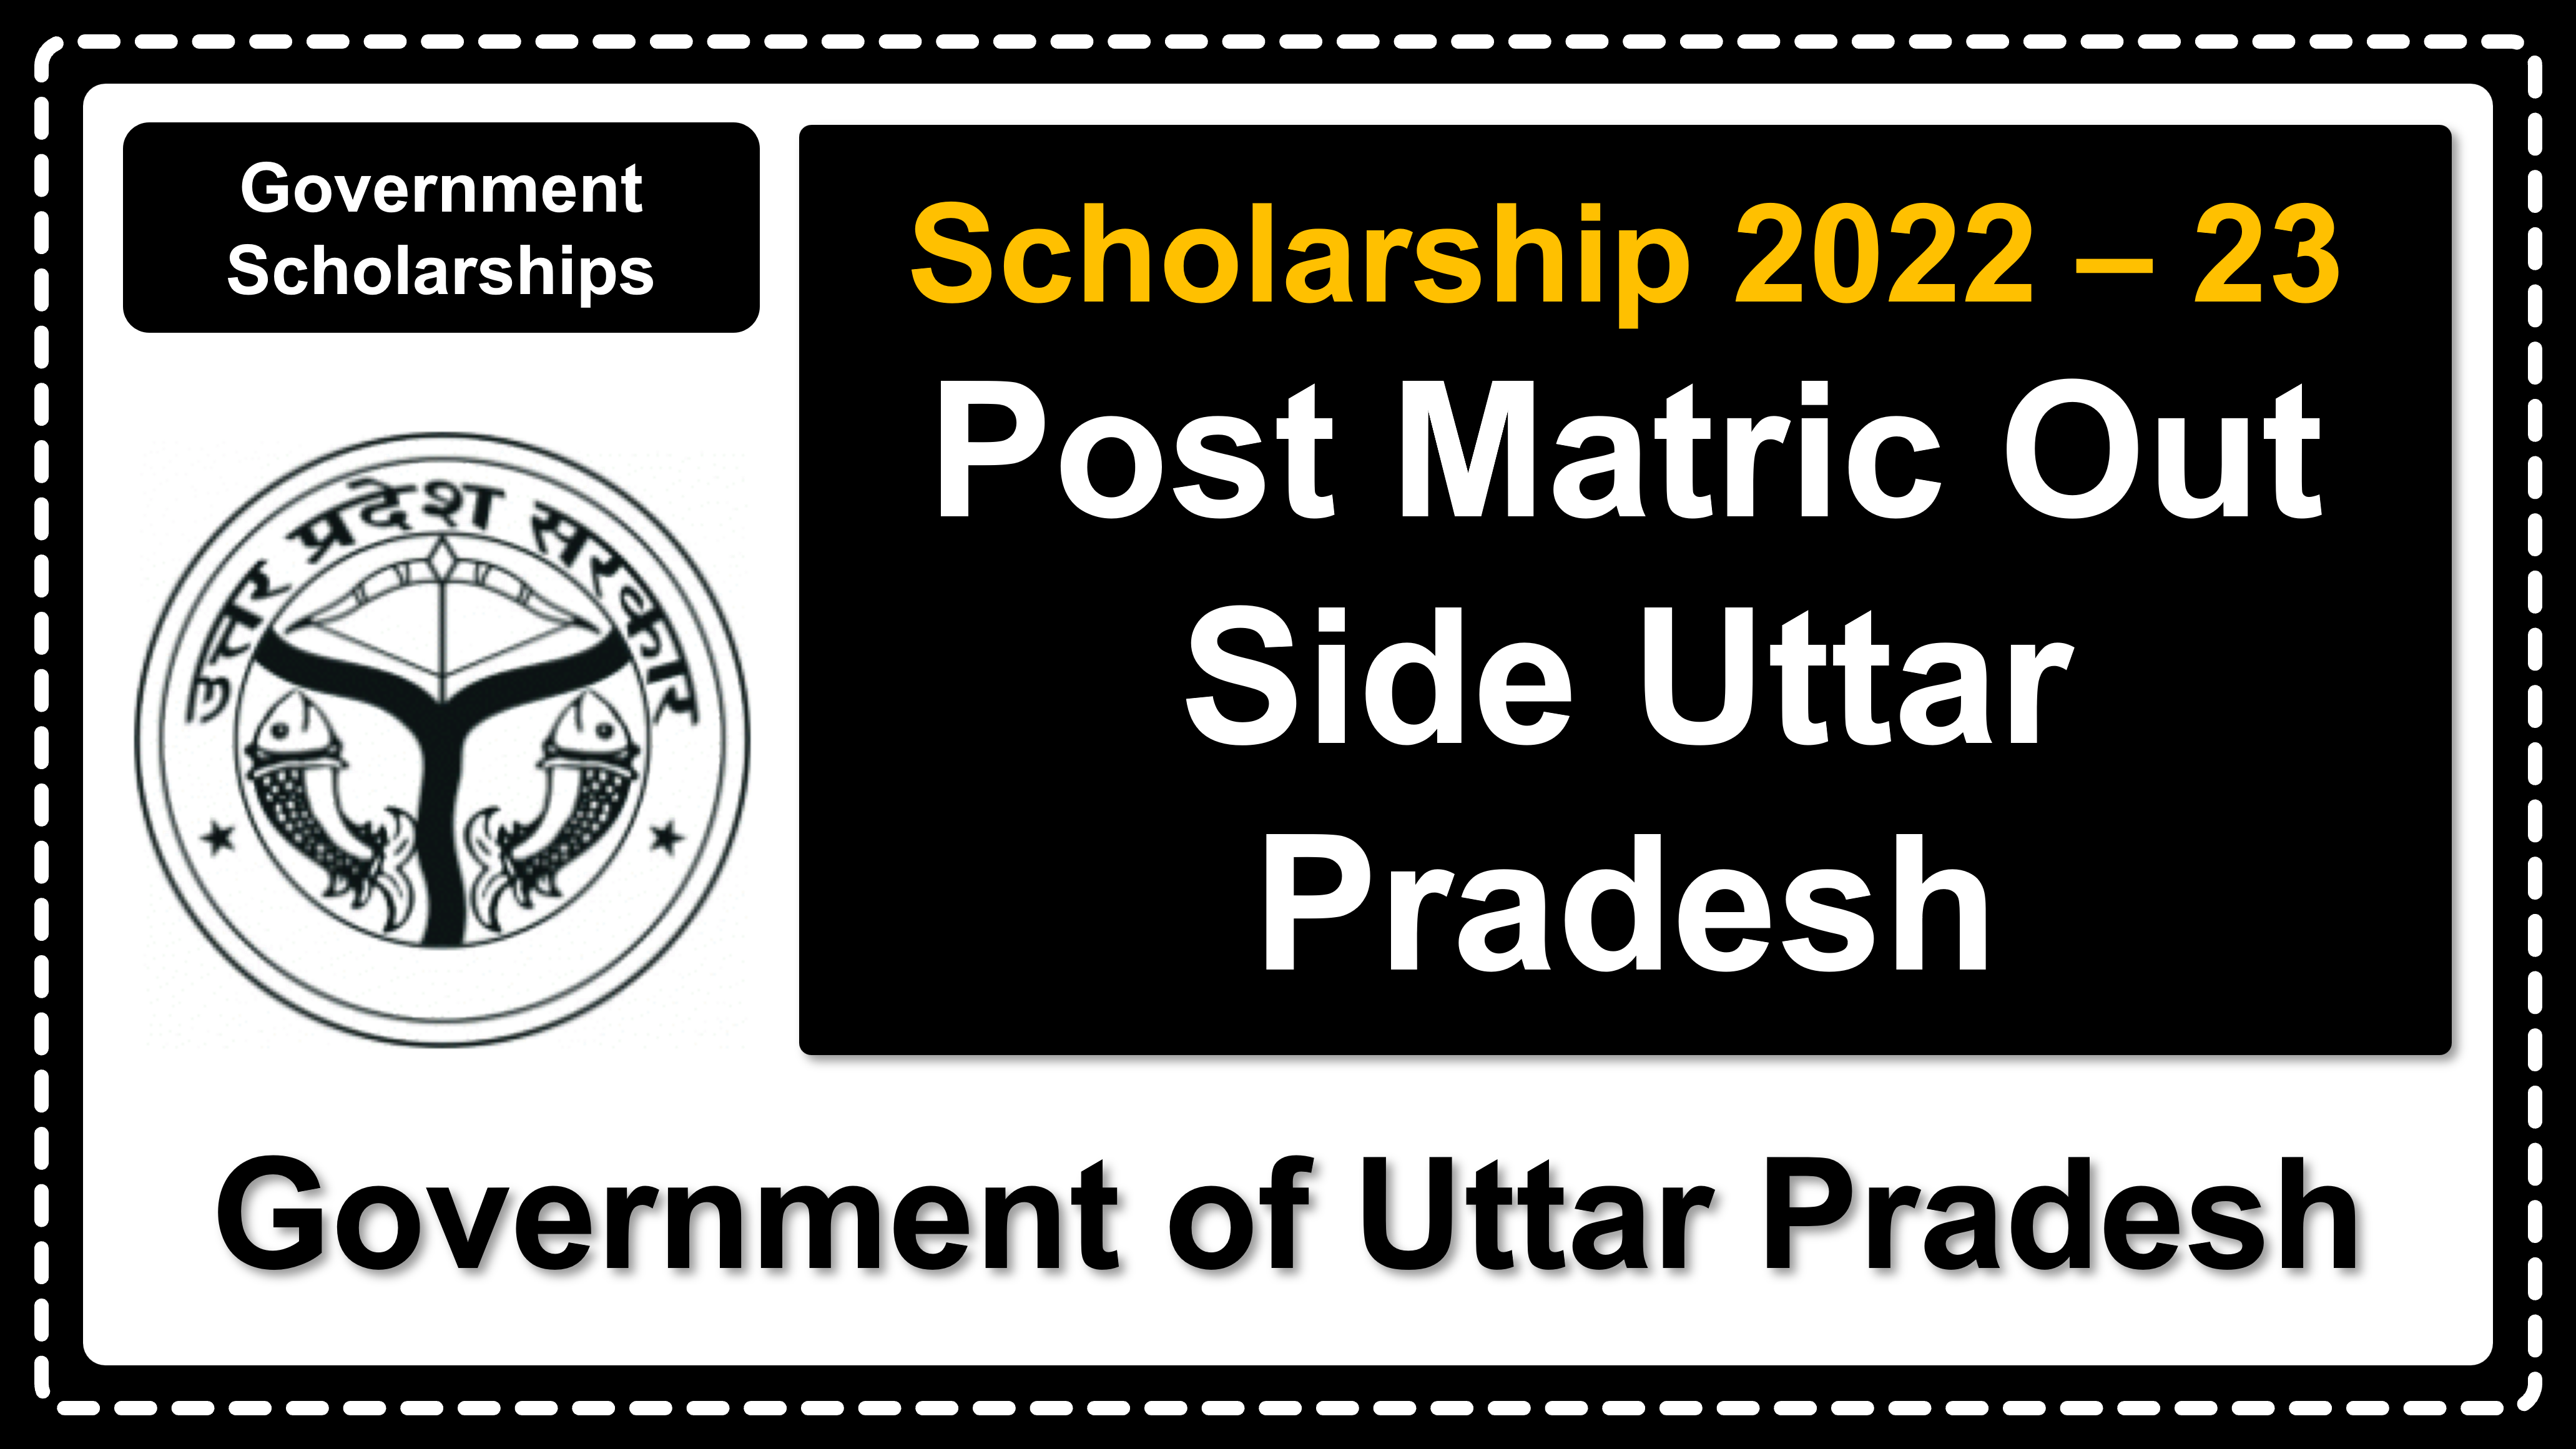 scholarship.up.gov.in | Government of Uttar Pradesh | Details of Scholarship Rules, Important Dates, Eligibility Criteria, Fee, Document, How to Apply etc. | Government of Uttar Pradesh